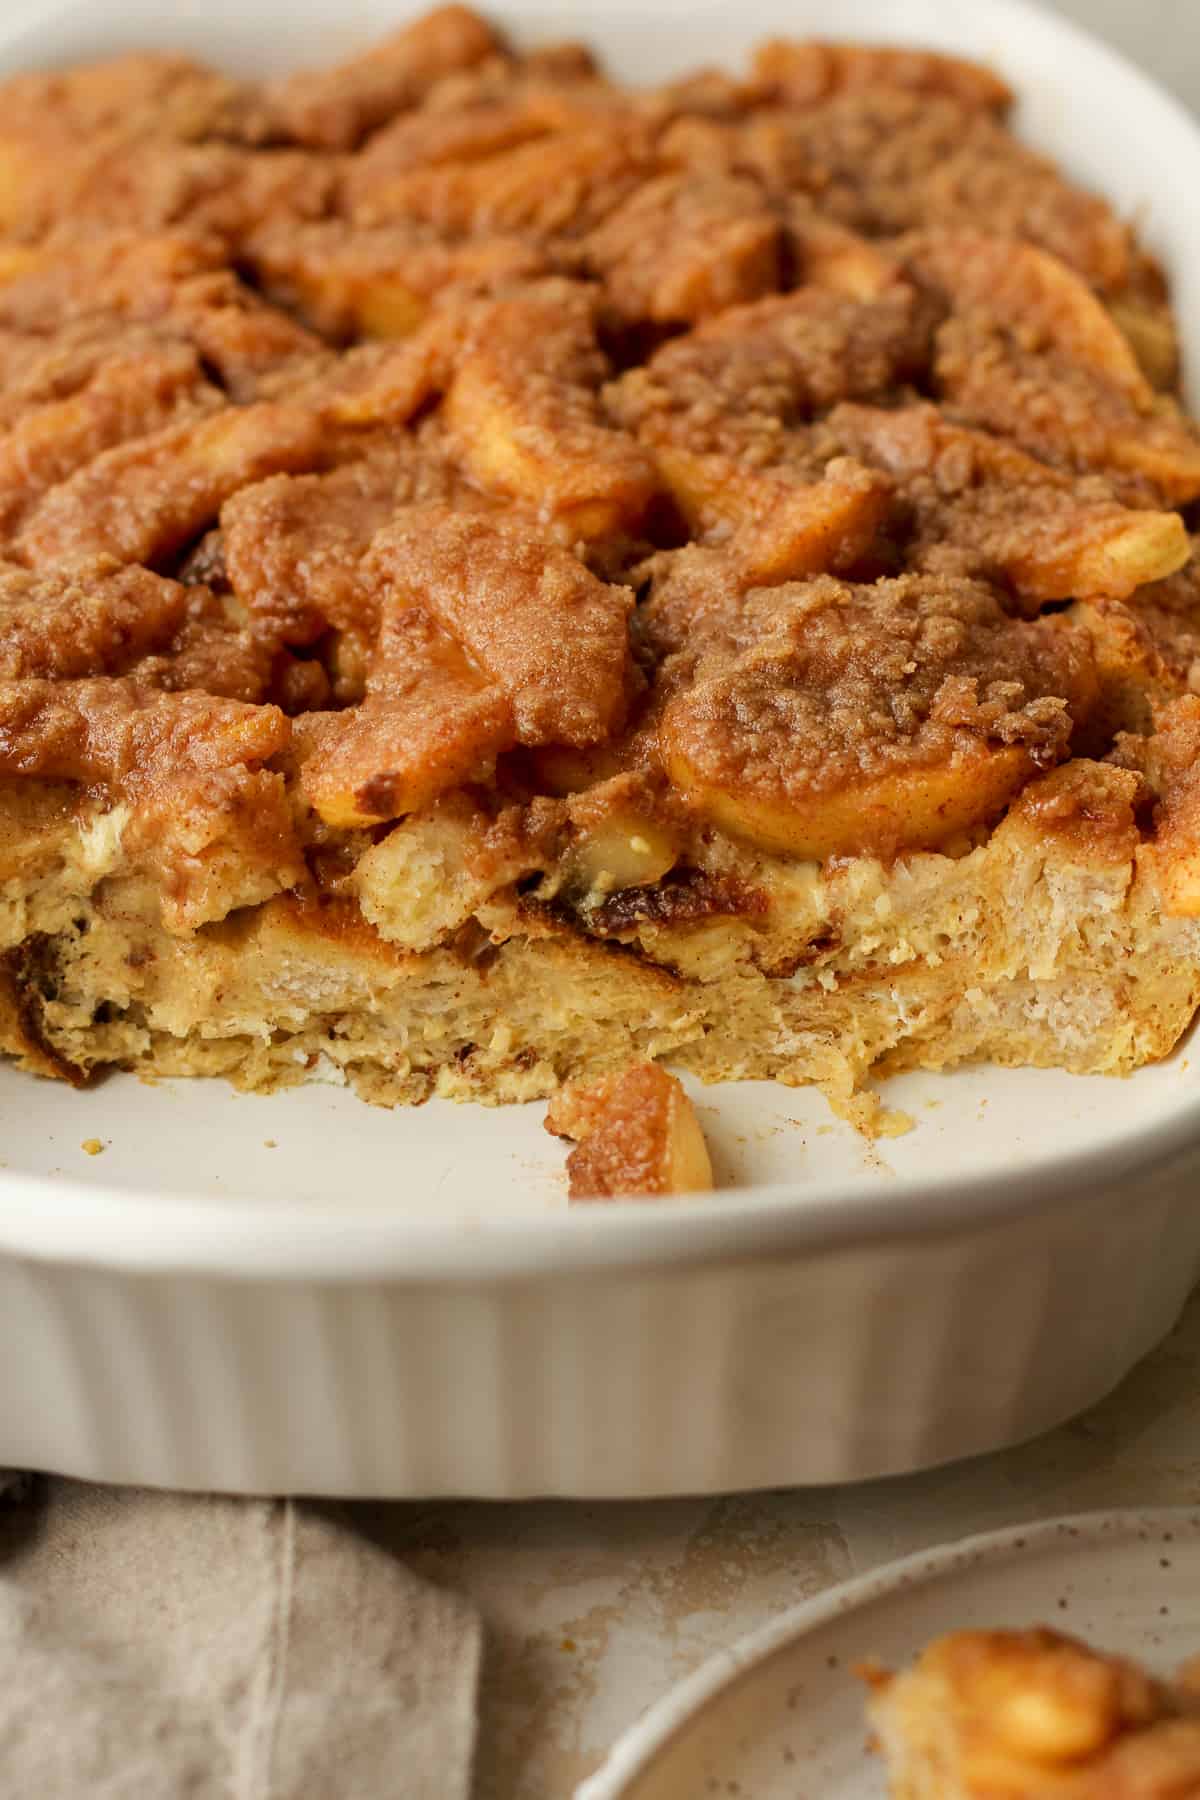 Side view of a partial French toast casserole showing the insides.